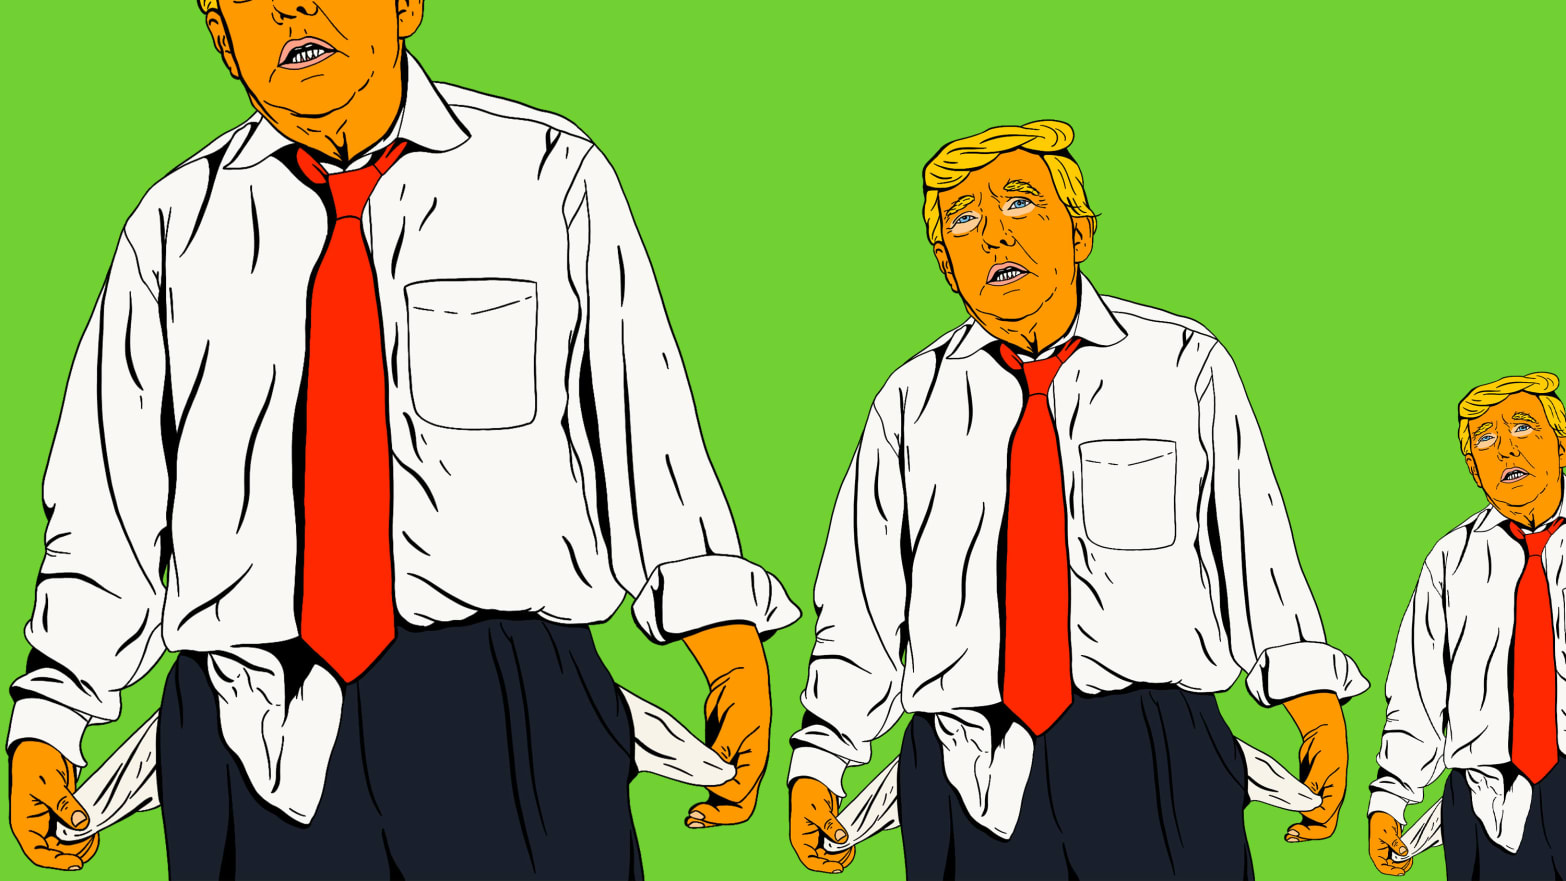 Illustration of Donald Trump with his empty pockets turned out